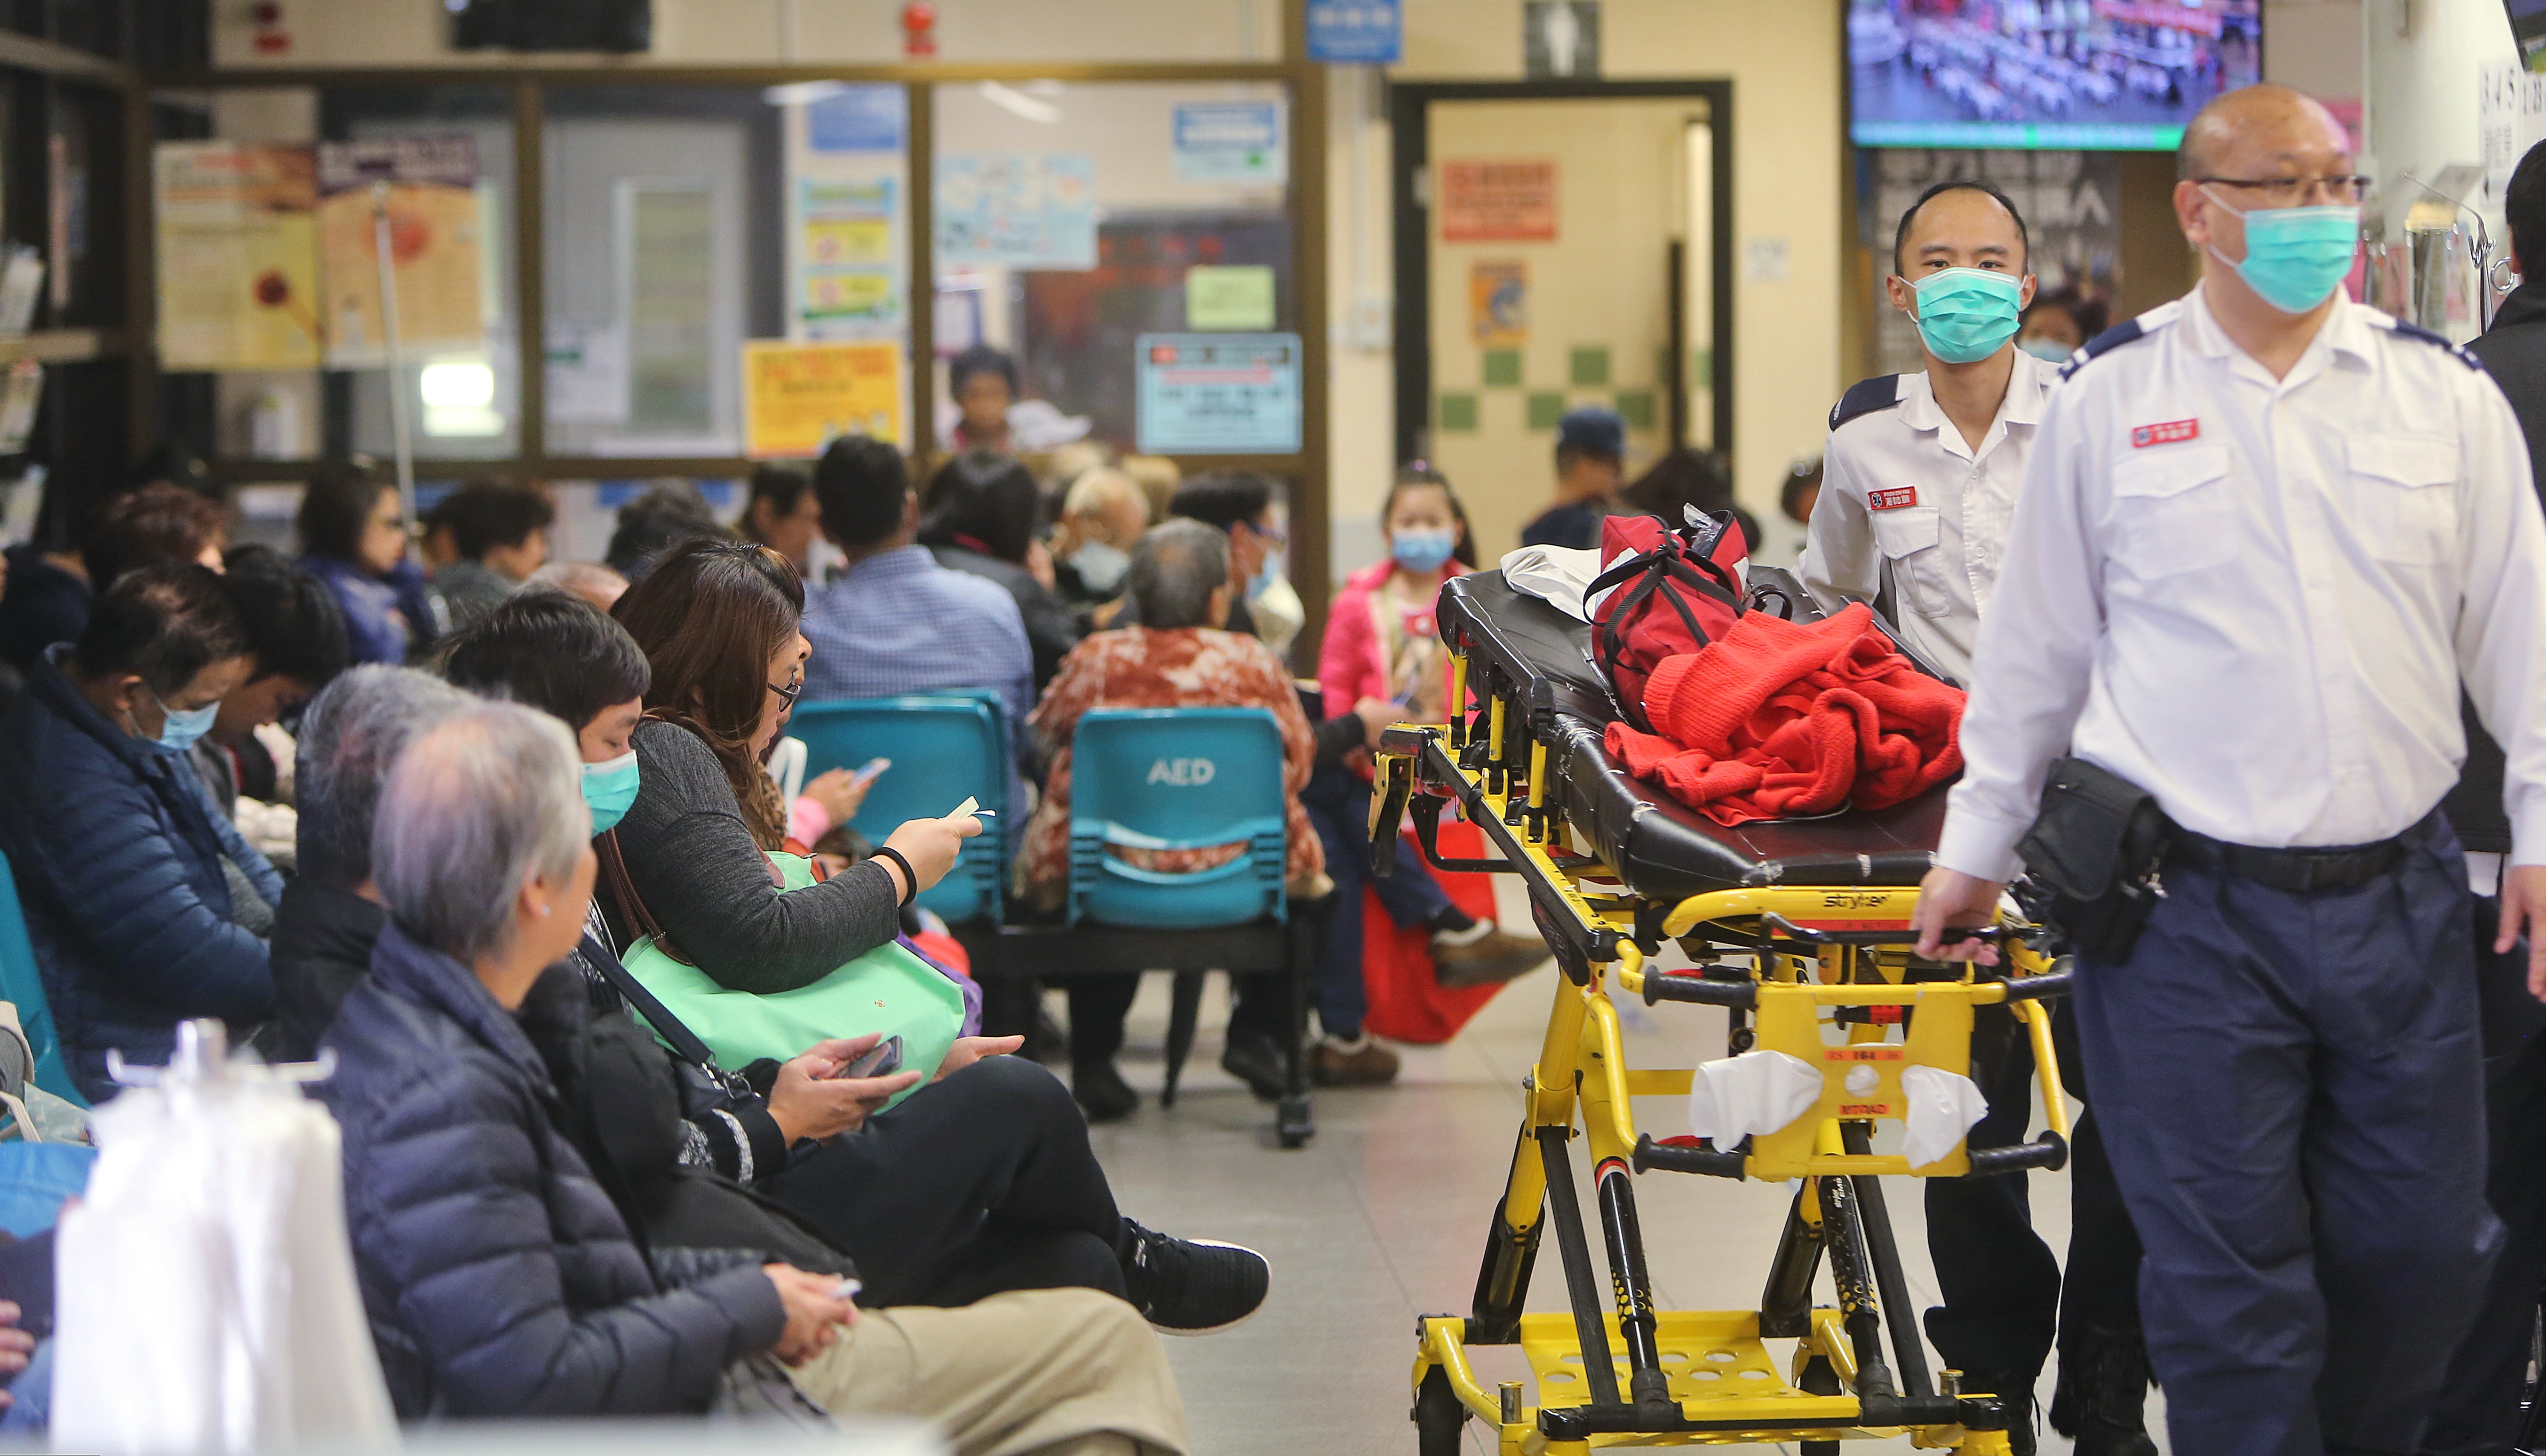 Patients wait in the accident and emergency room at Queen Elizabeth Hospital in Yau Ma Tei in December 2017. The shortage of doctors at public hospitals has lengthened wait times for patients. Photo: Winson Wong